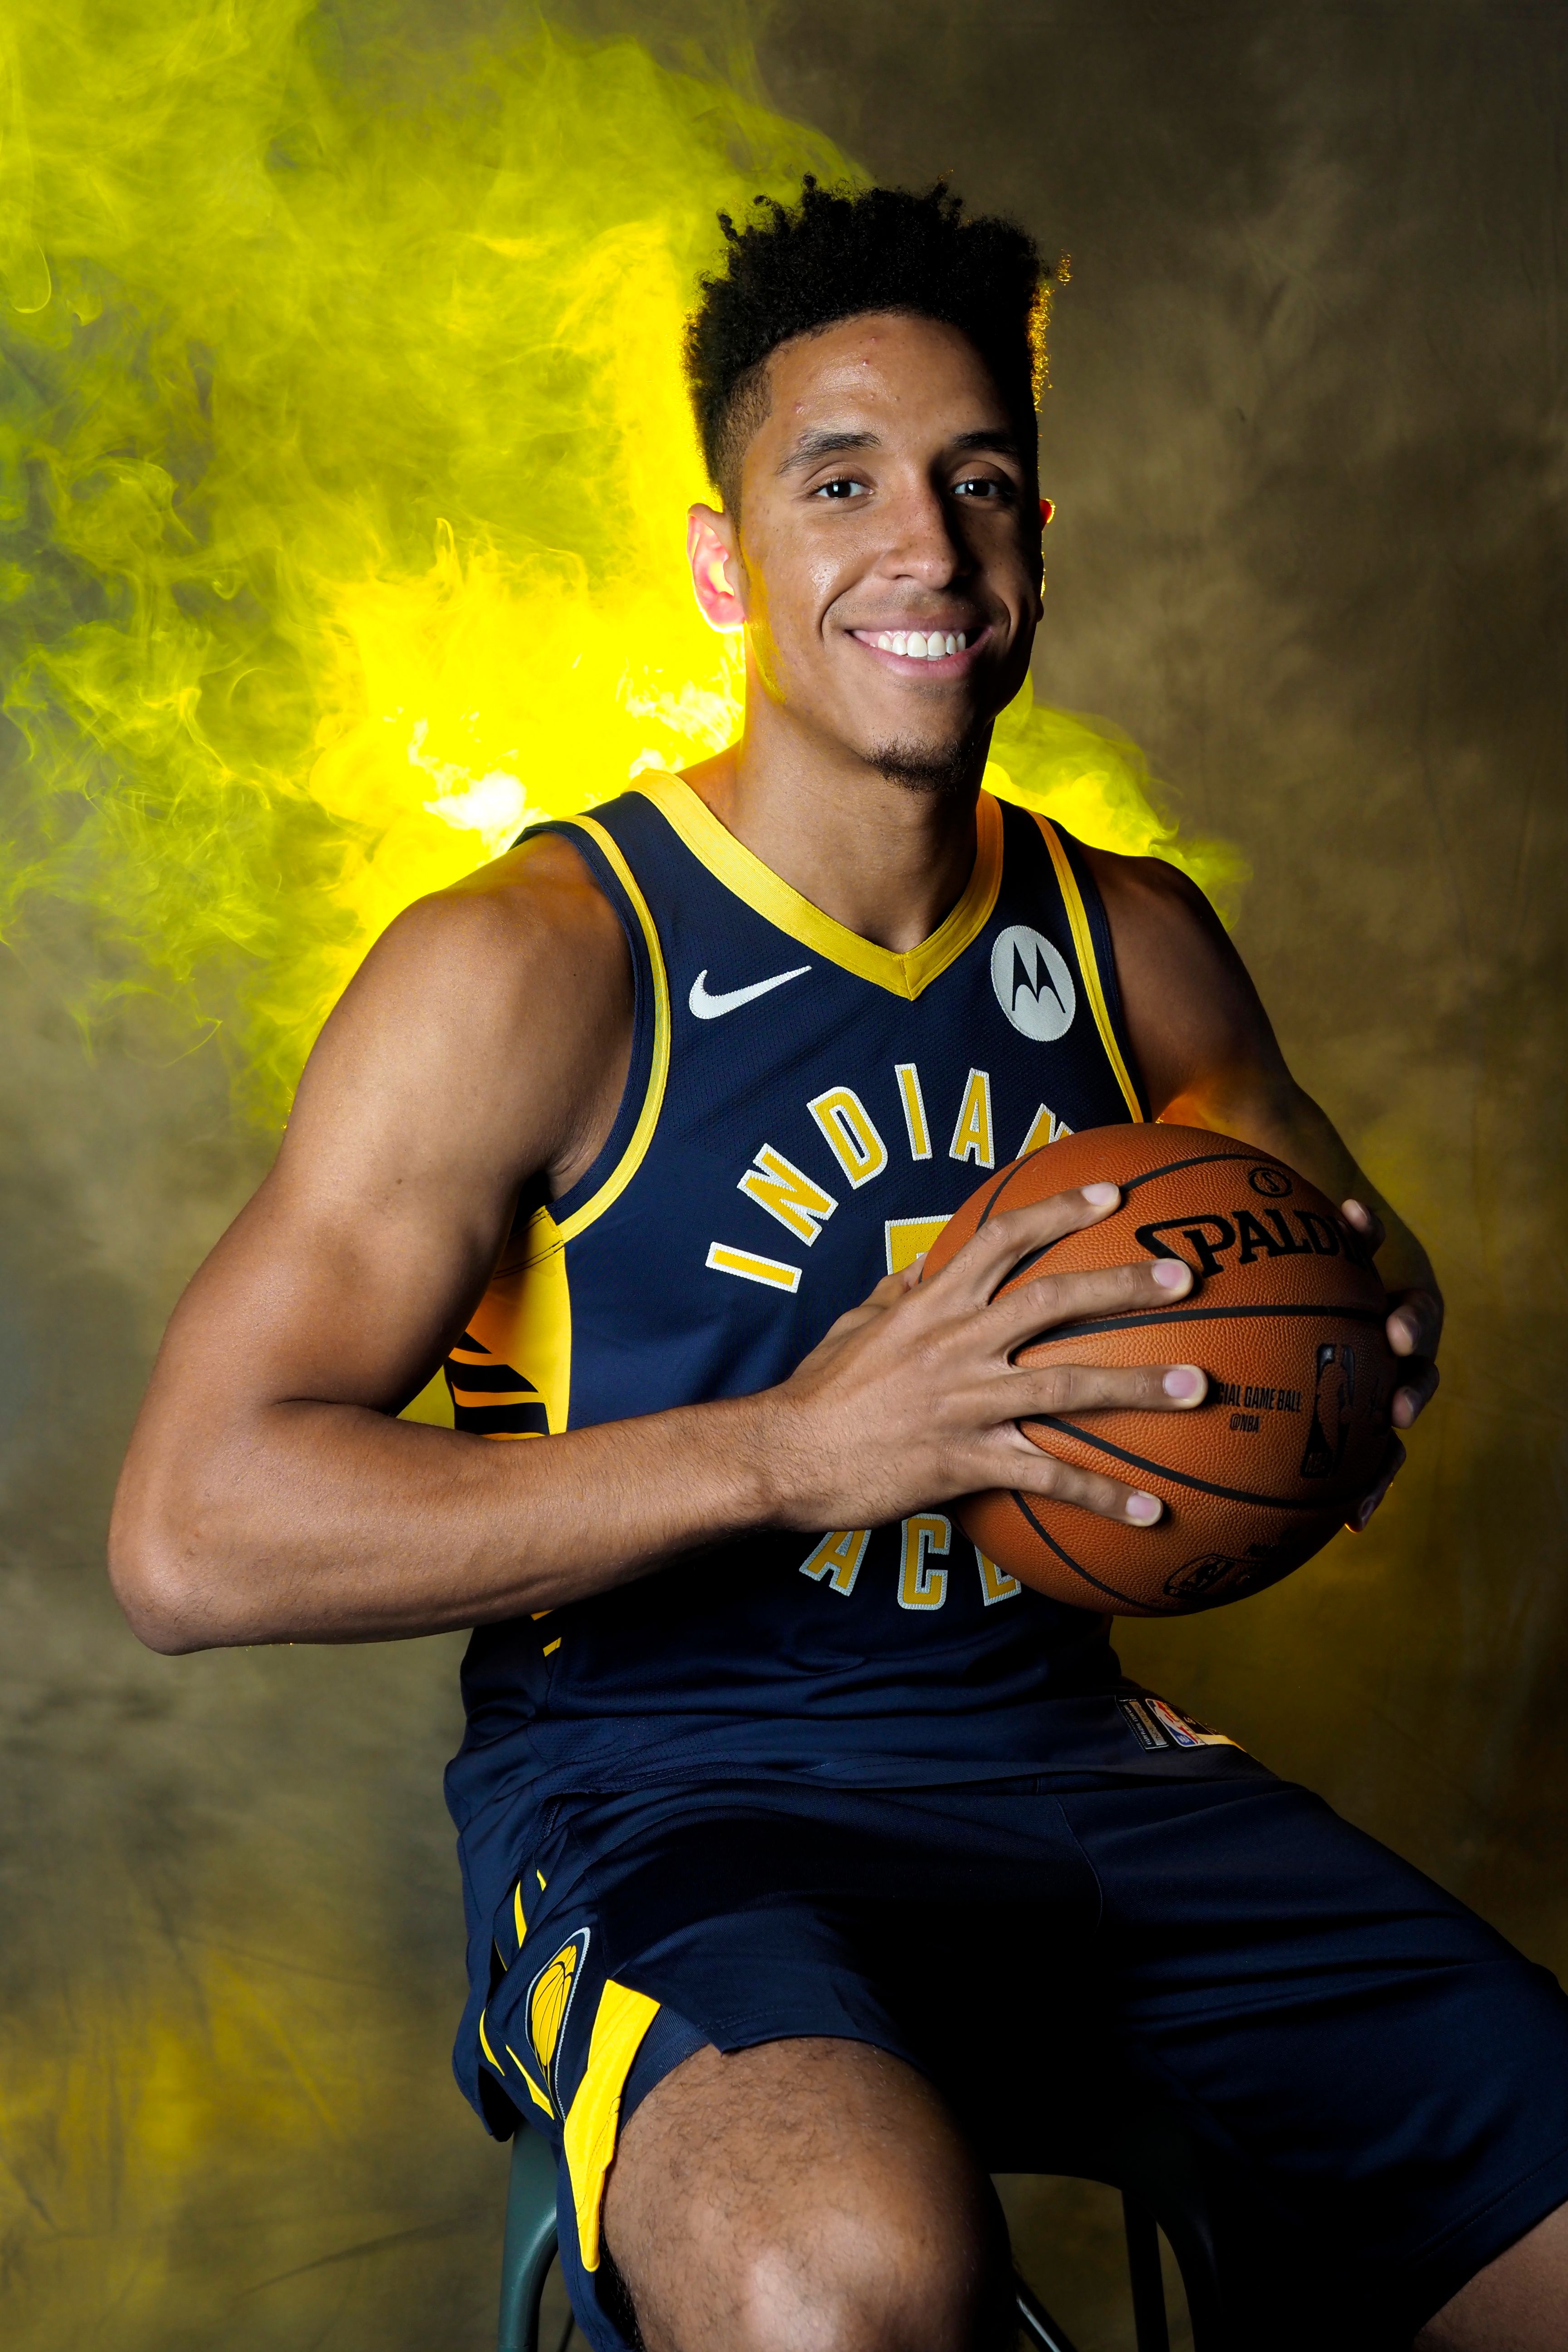 Malcolm Brogdon of the Indiana Pacers poses for a portrait at media day on September 27, 2019 | Photo: Getty Images